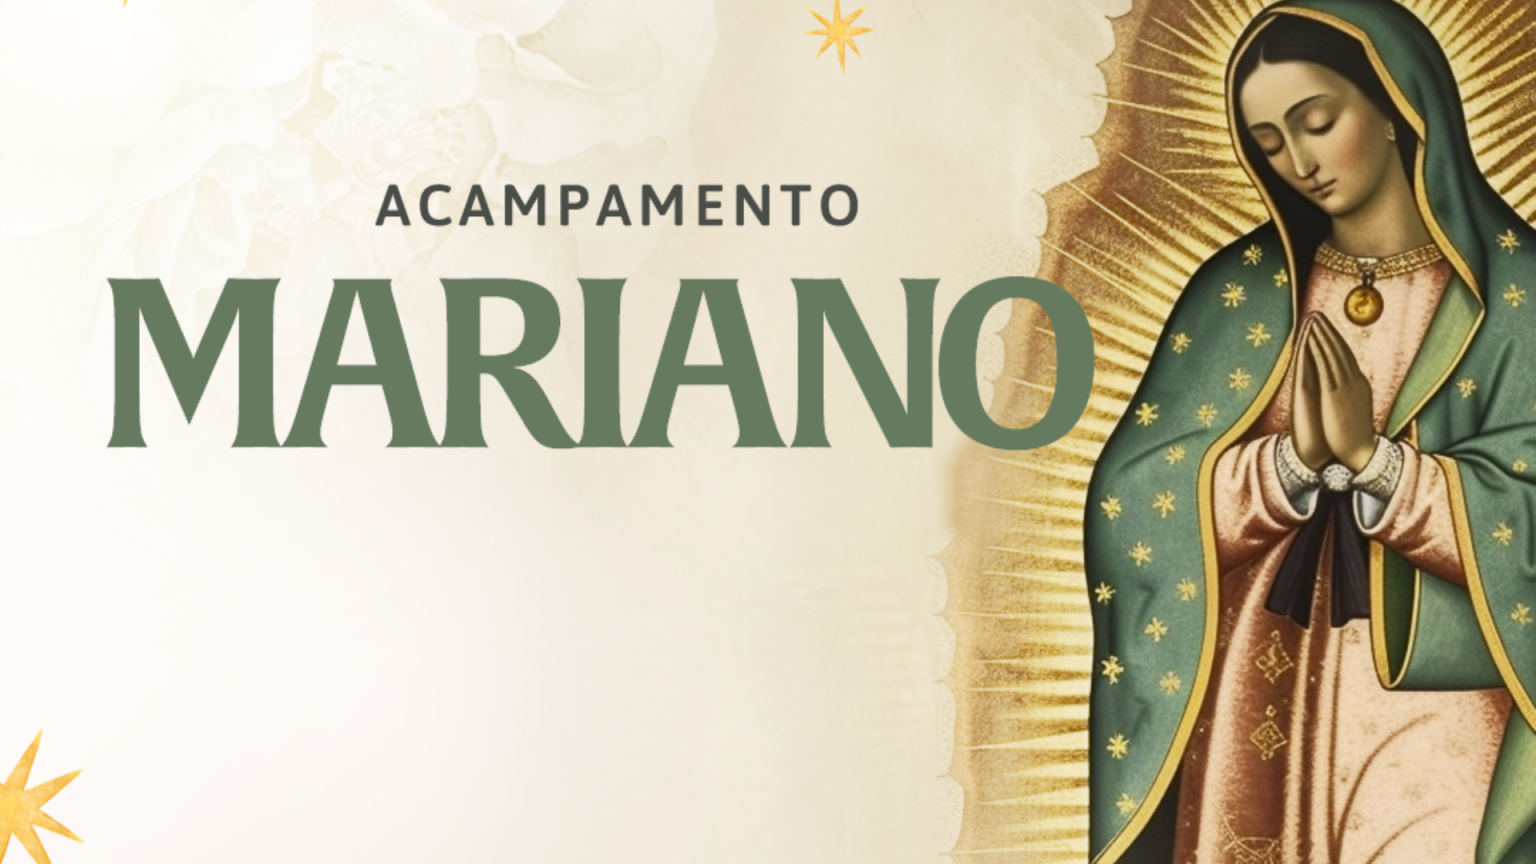 mariano-1536x864.png